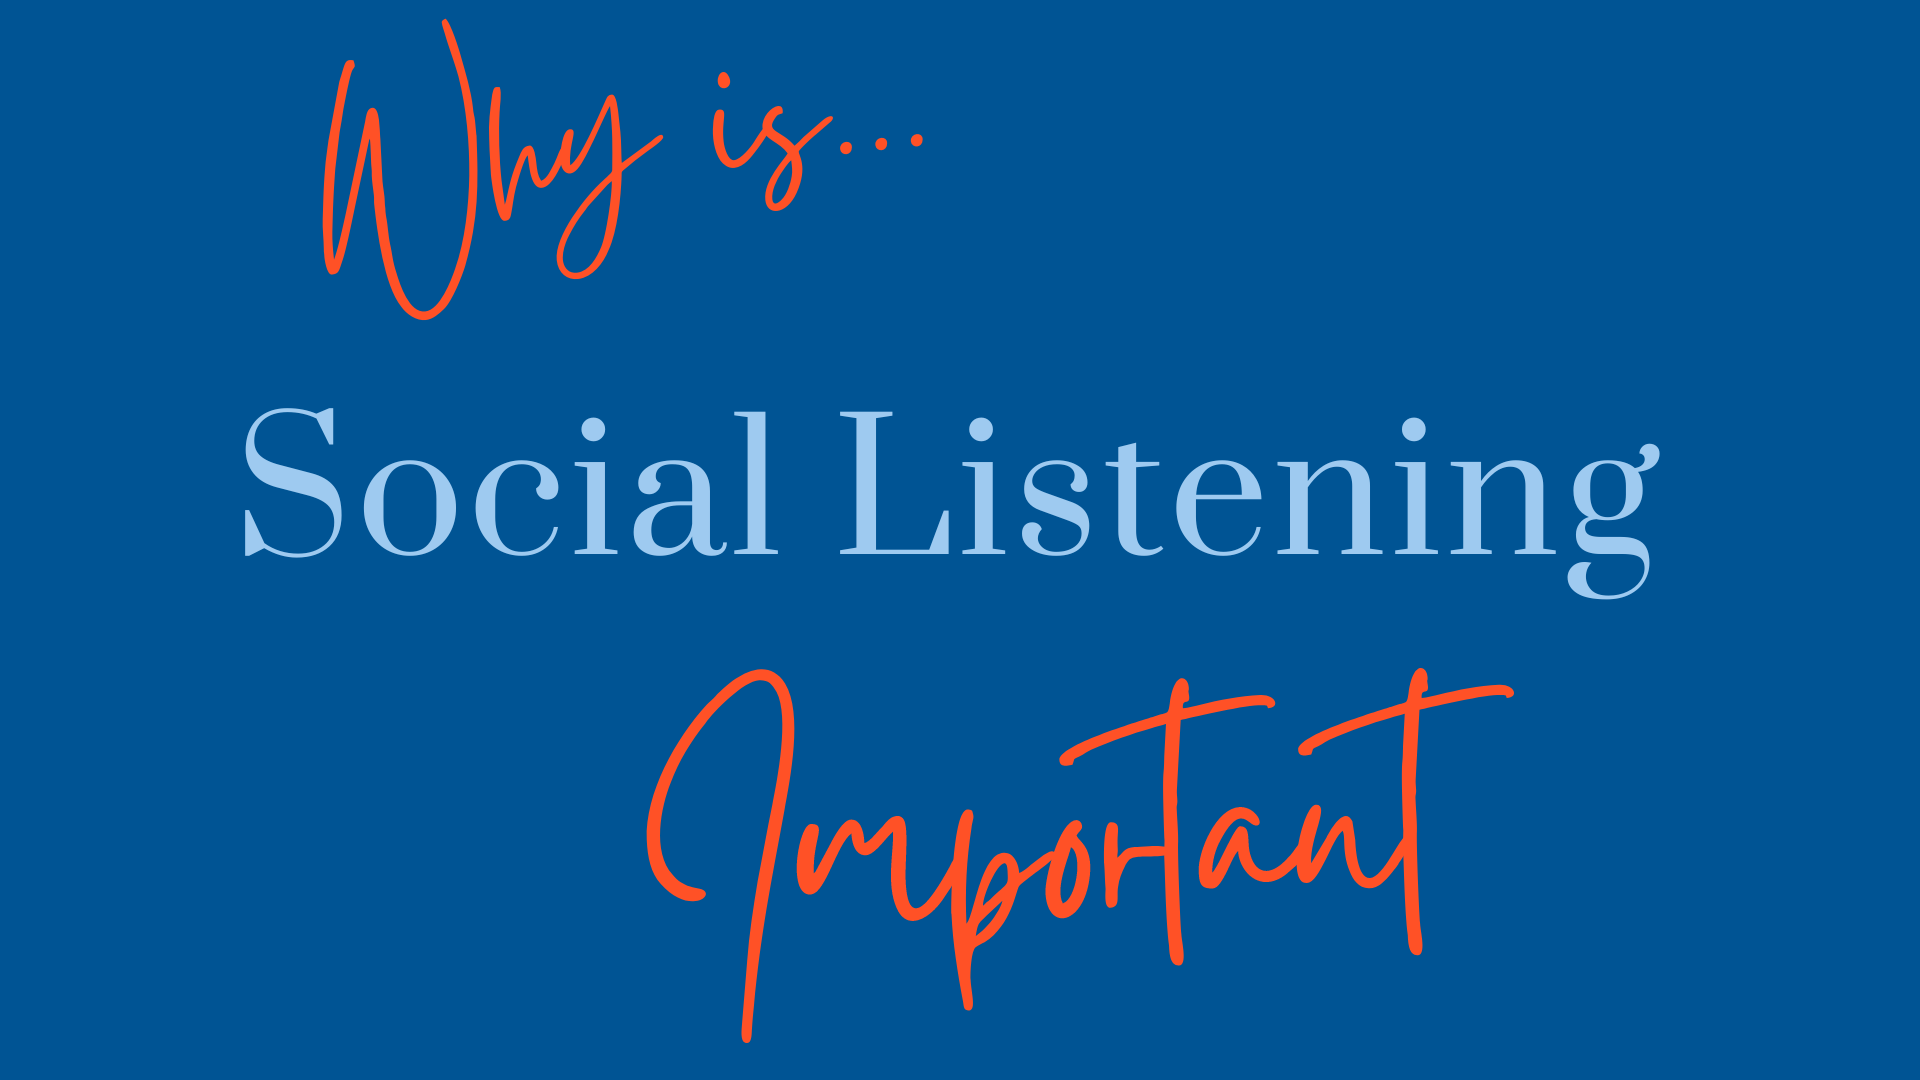 Why is social listening important?